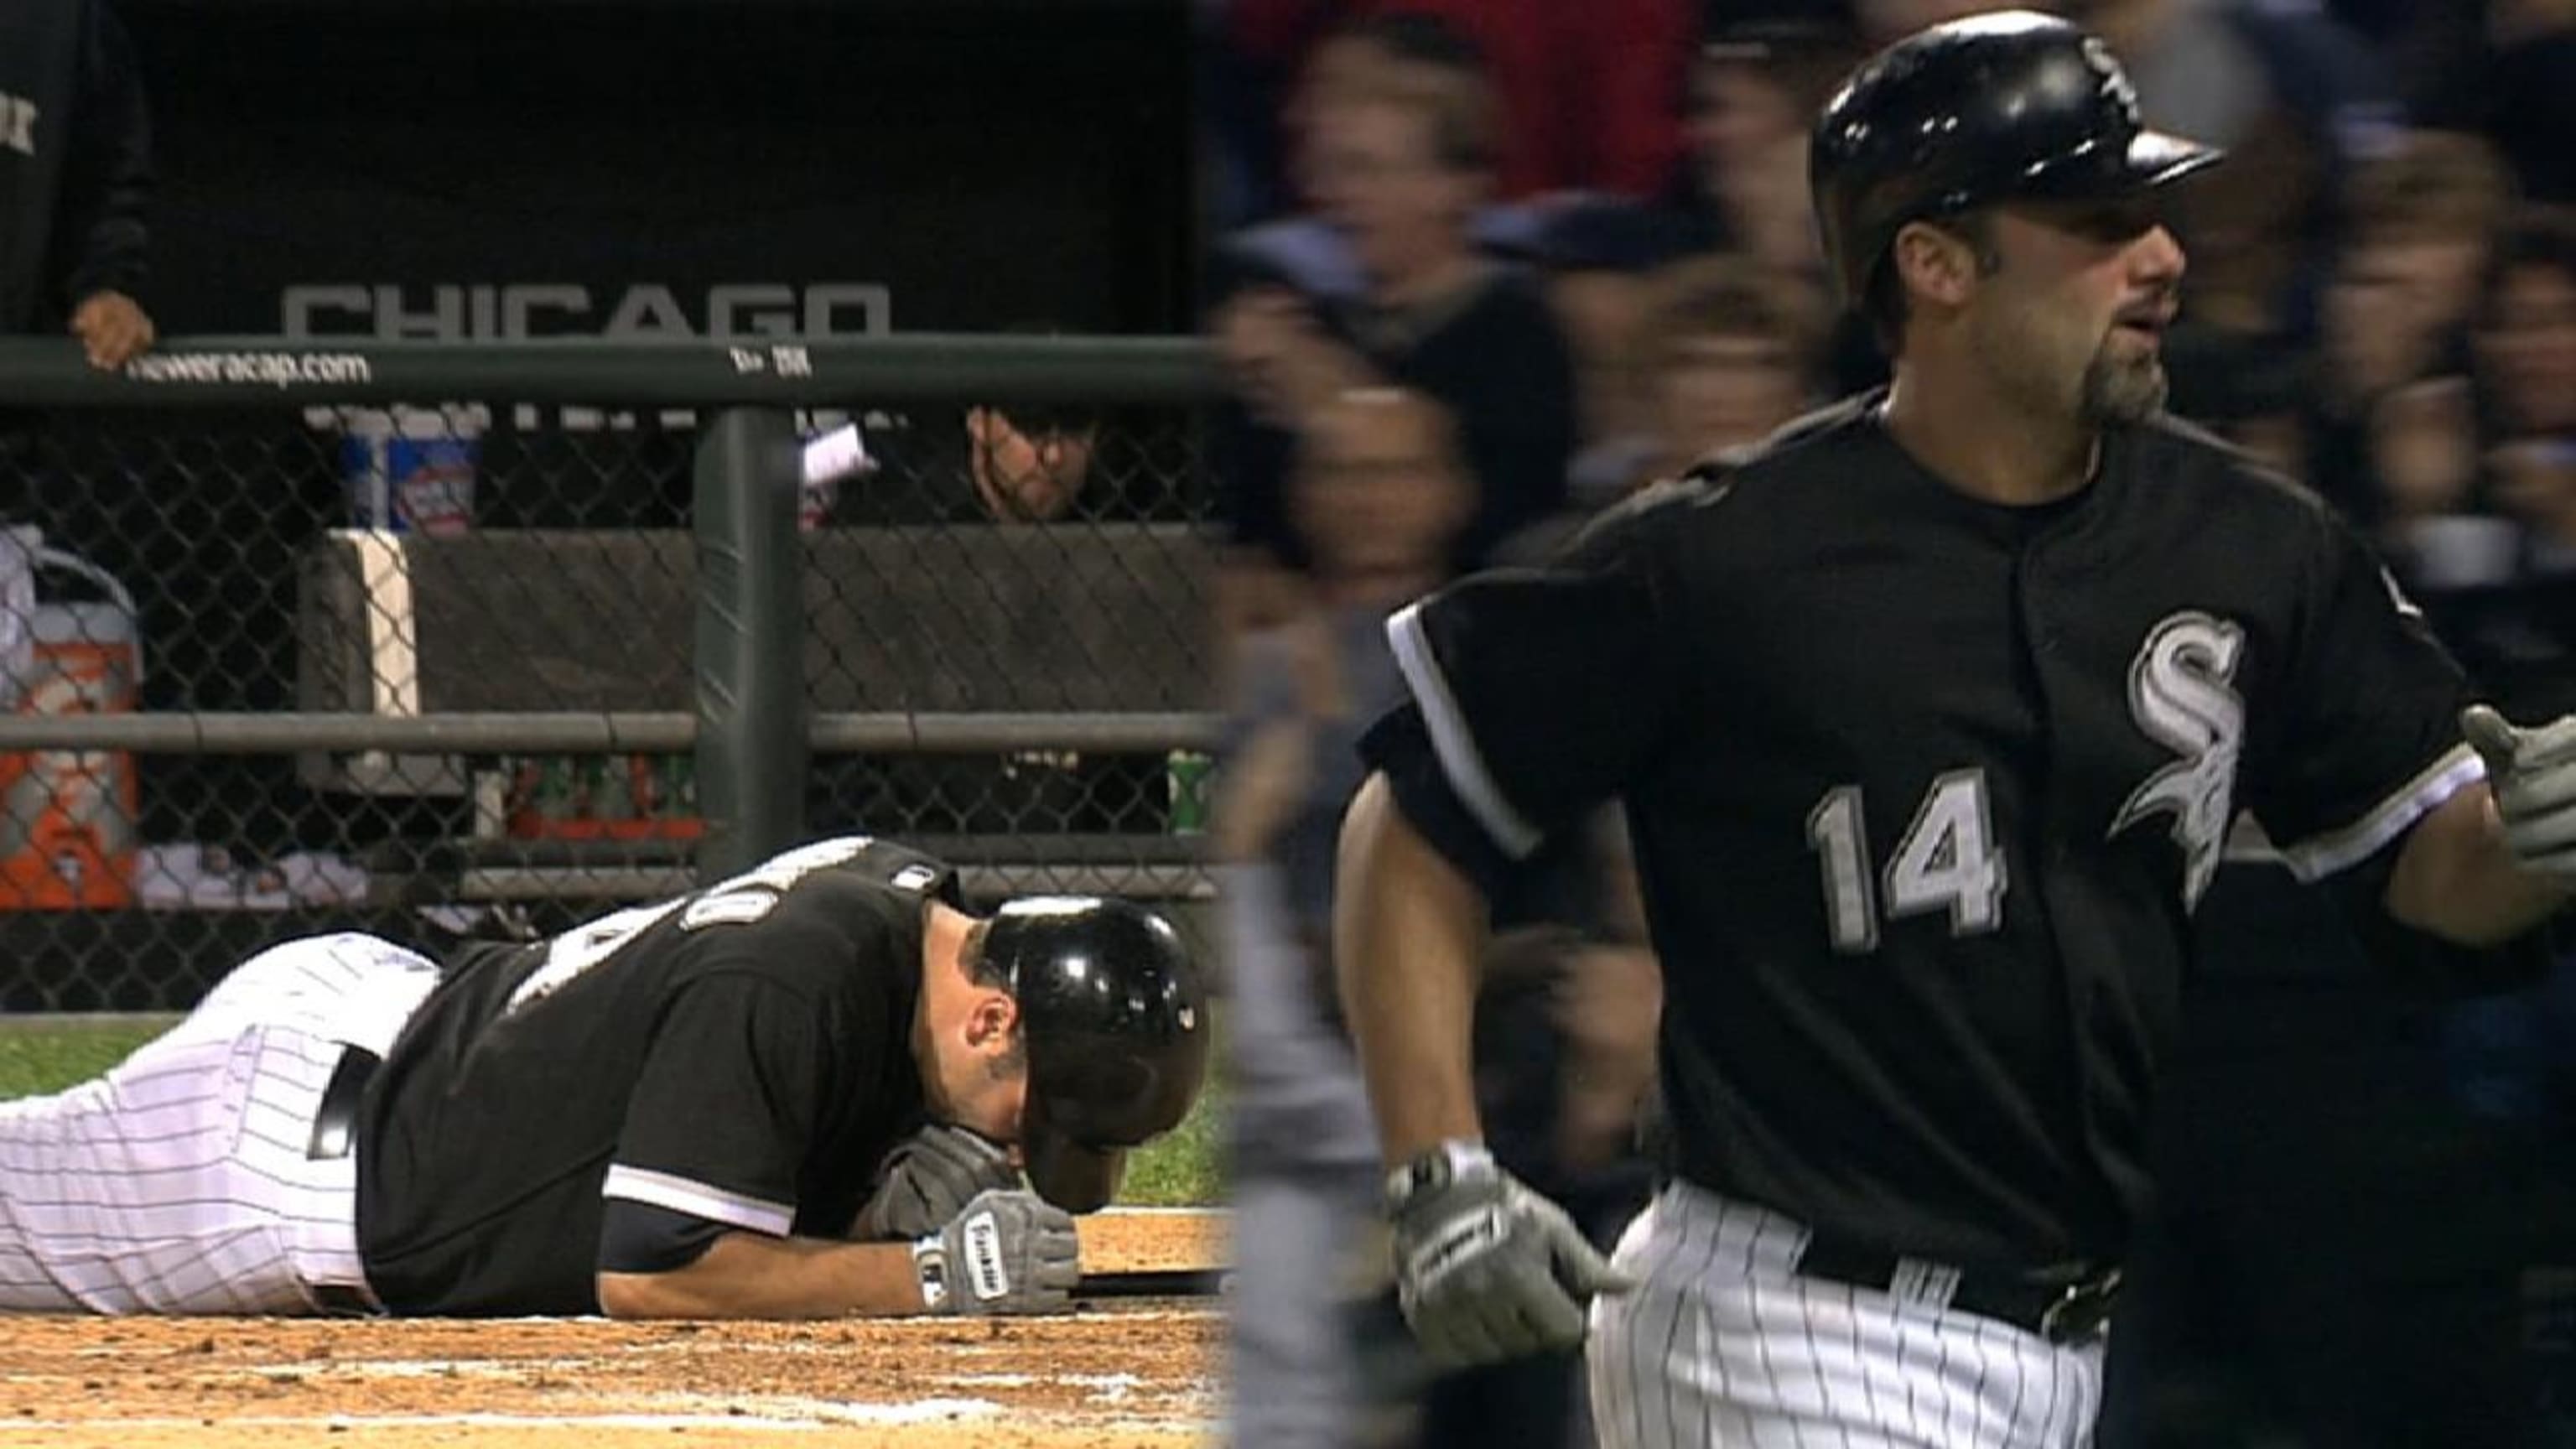 Paul Konerko once got hit in the face by a pitch, and then homered in his  next at-bat